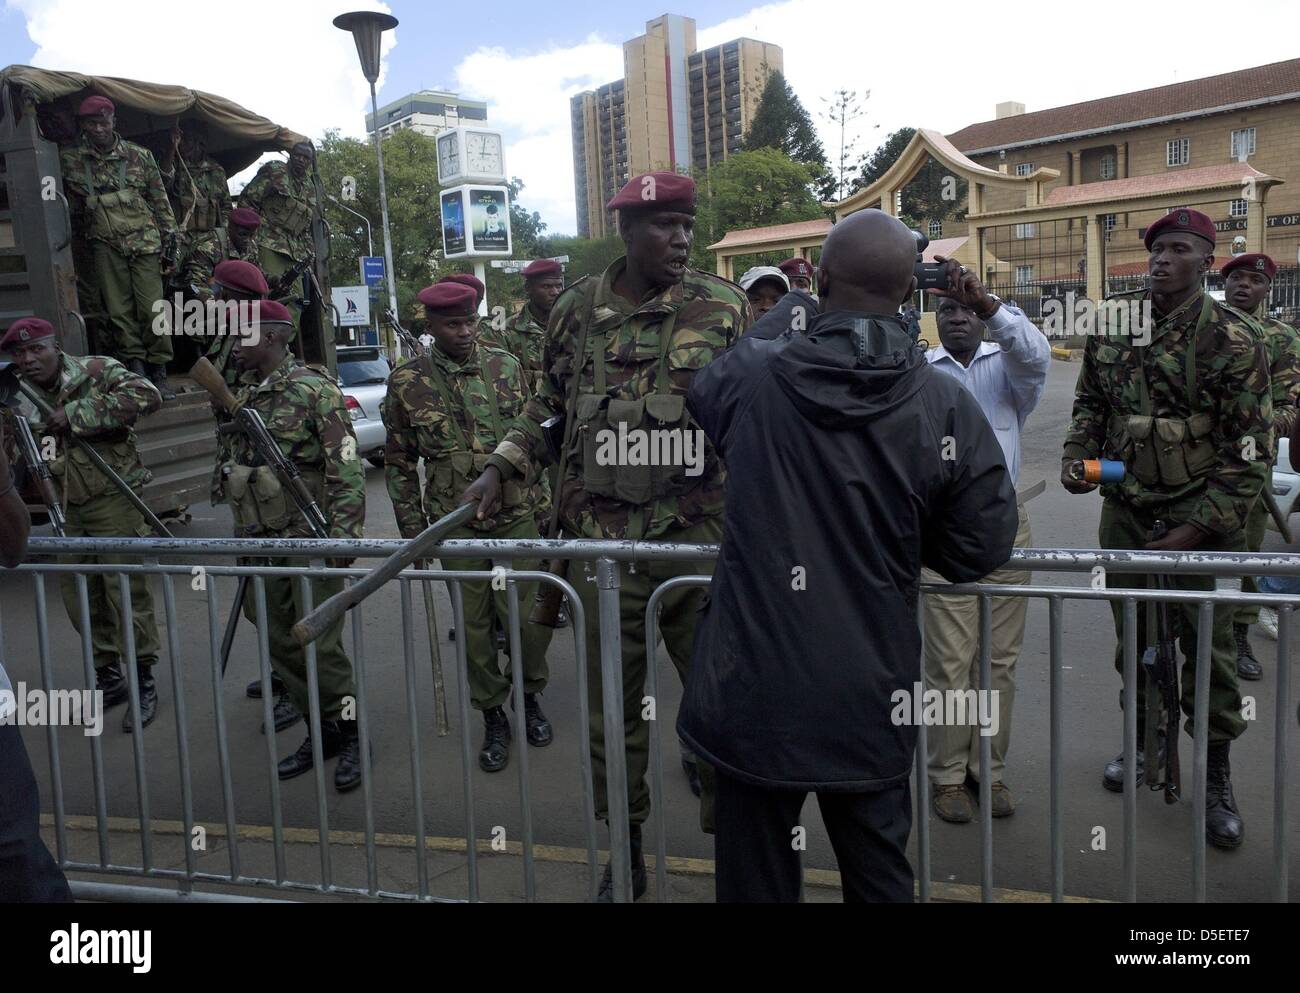 Nairobi, Kenya. 30th March, 2013. Officers with the Kenyan General Service Unit (a special division of the police department) detain a protester outside the grounds of the Supreme Court building. The court upheld Uhuru Kenyatta's presidential poll victory, rejecting challenger Raila Odinga's petition. Presidential, legislative and municipal elections were held on March 4. Mr. Odinga, who polled second, challenged the results; he said the vote was not credible because of failures with the electronic voter ID system and the vote counting mechanism. (Cre Stock Photo